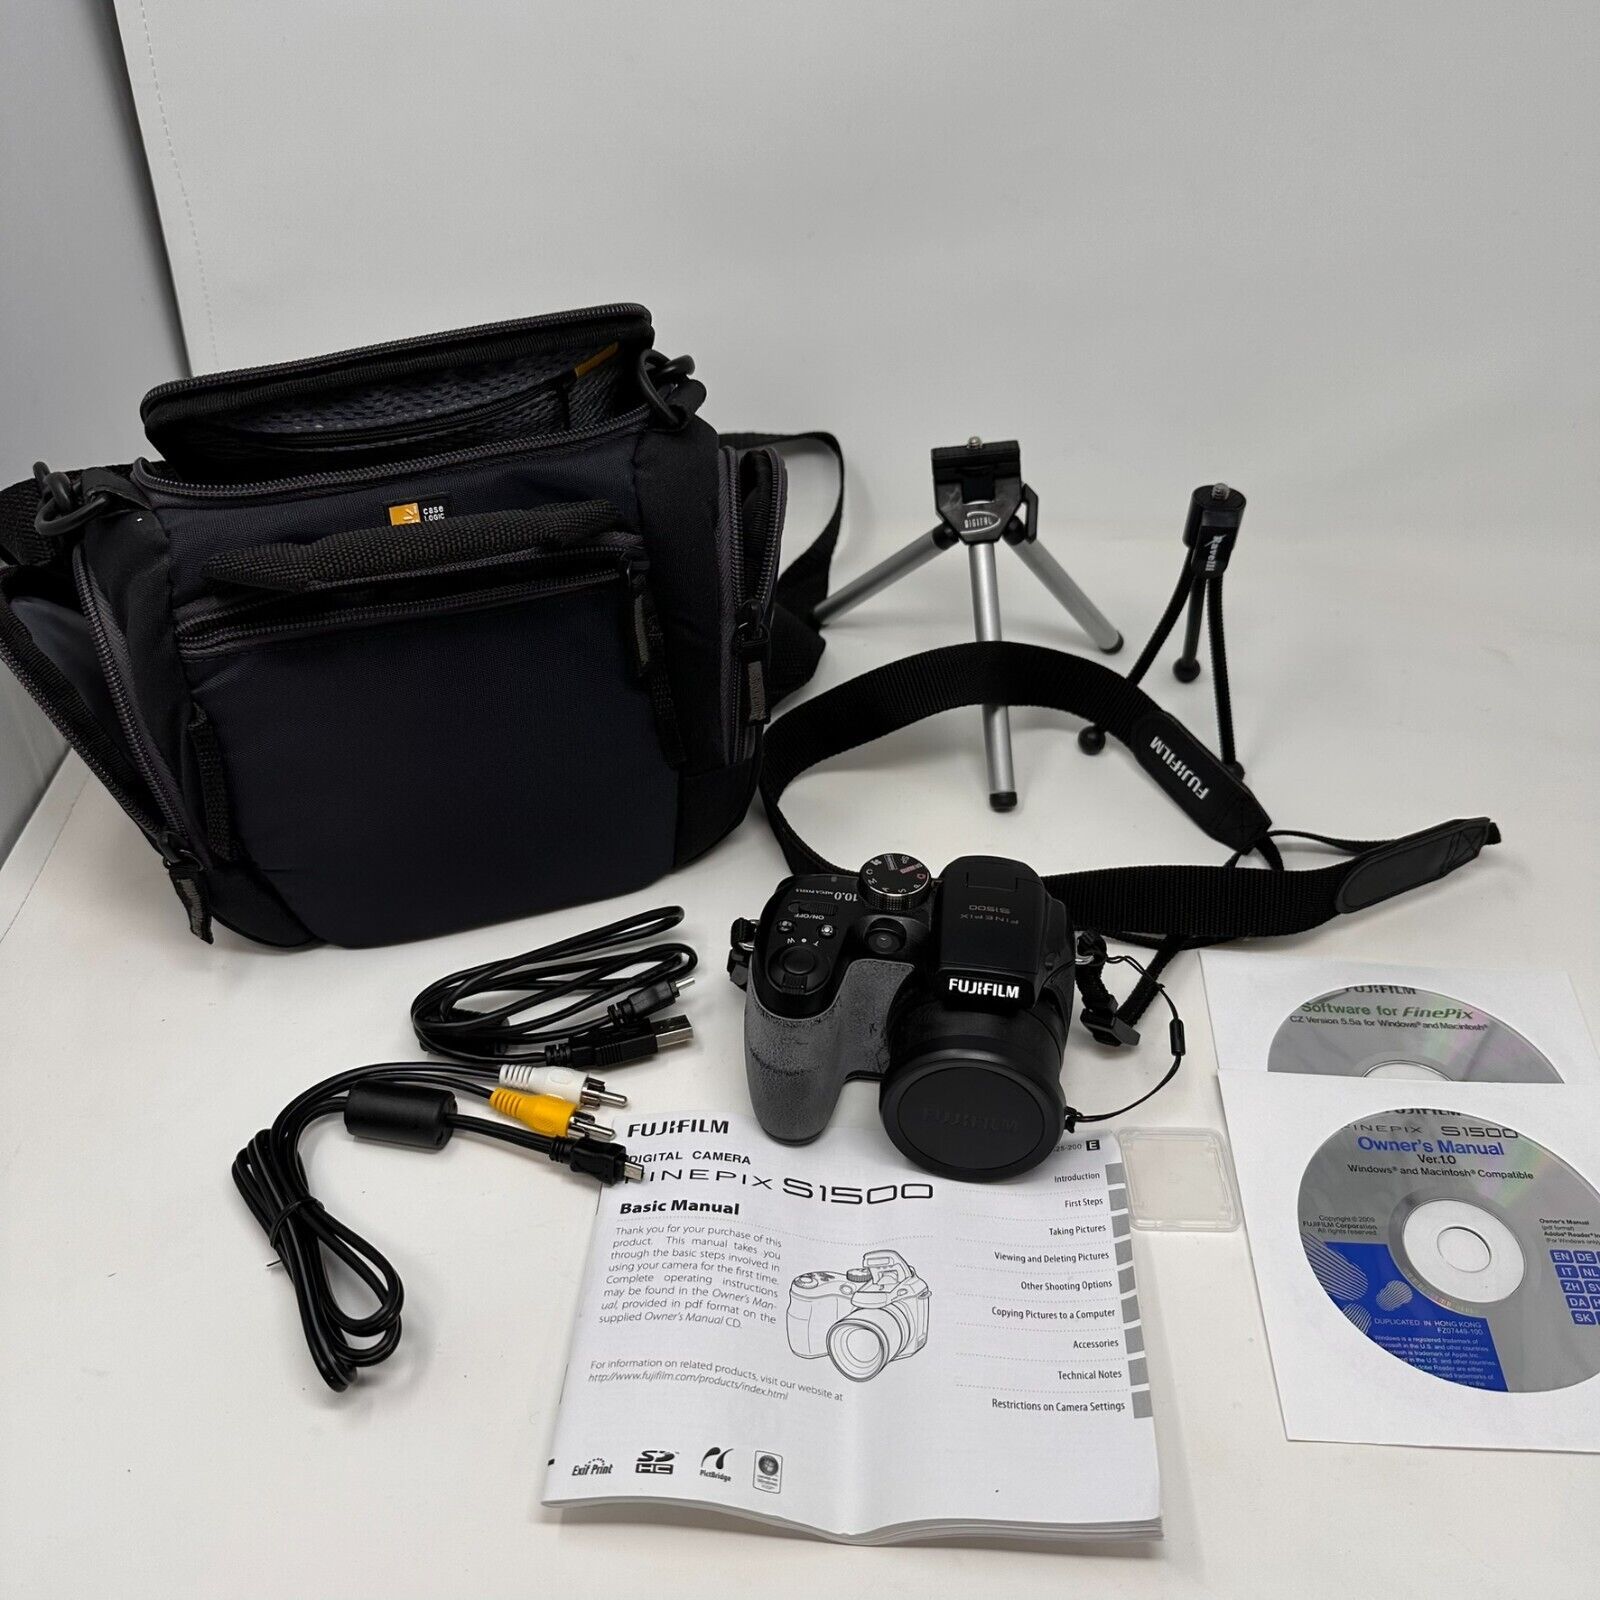 FujiFilm FinePix S1500 10MP 12x Zoom Mini SLR with Case, Cables and Disks TESTED - $37.62